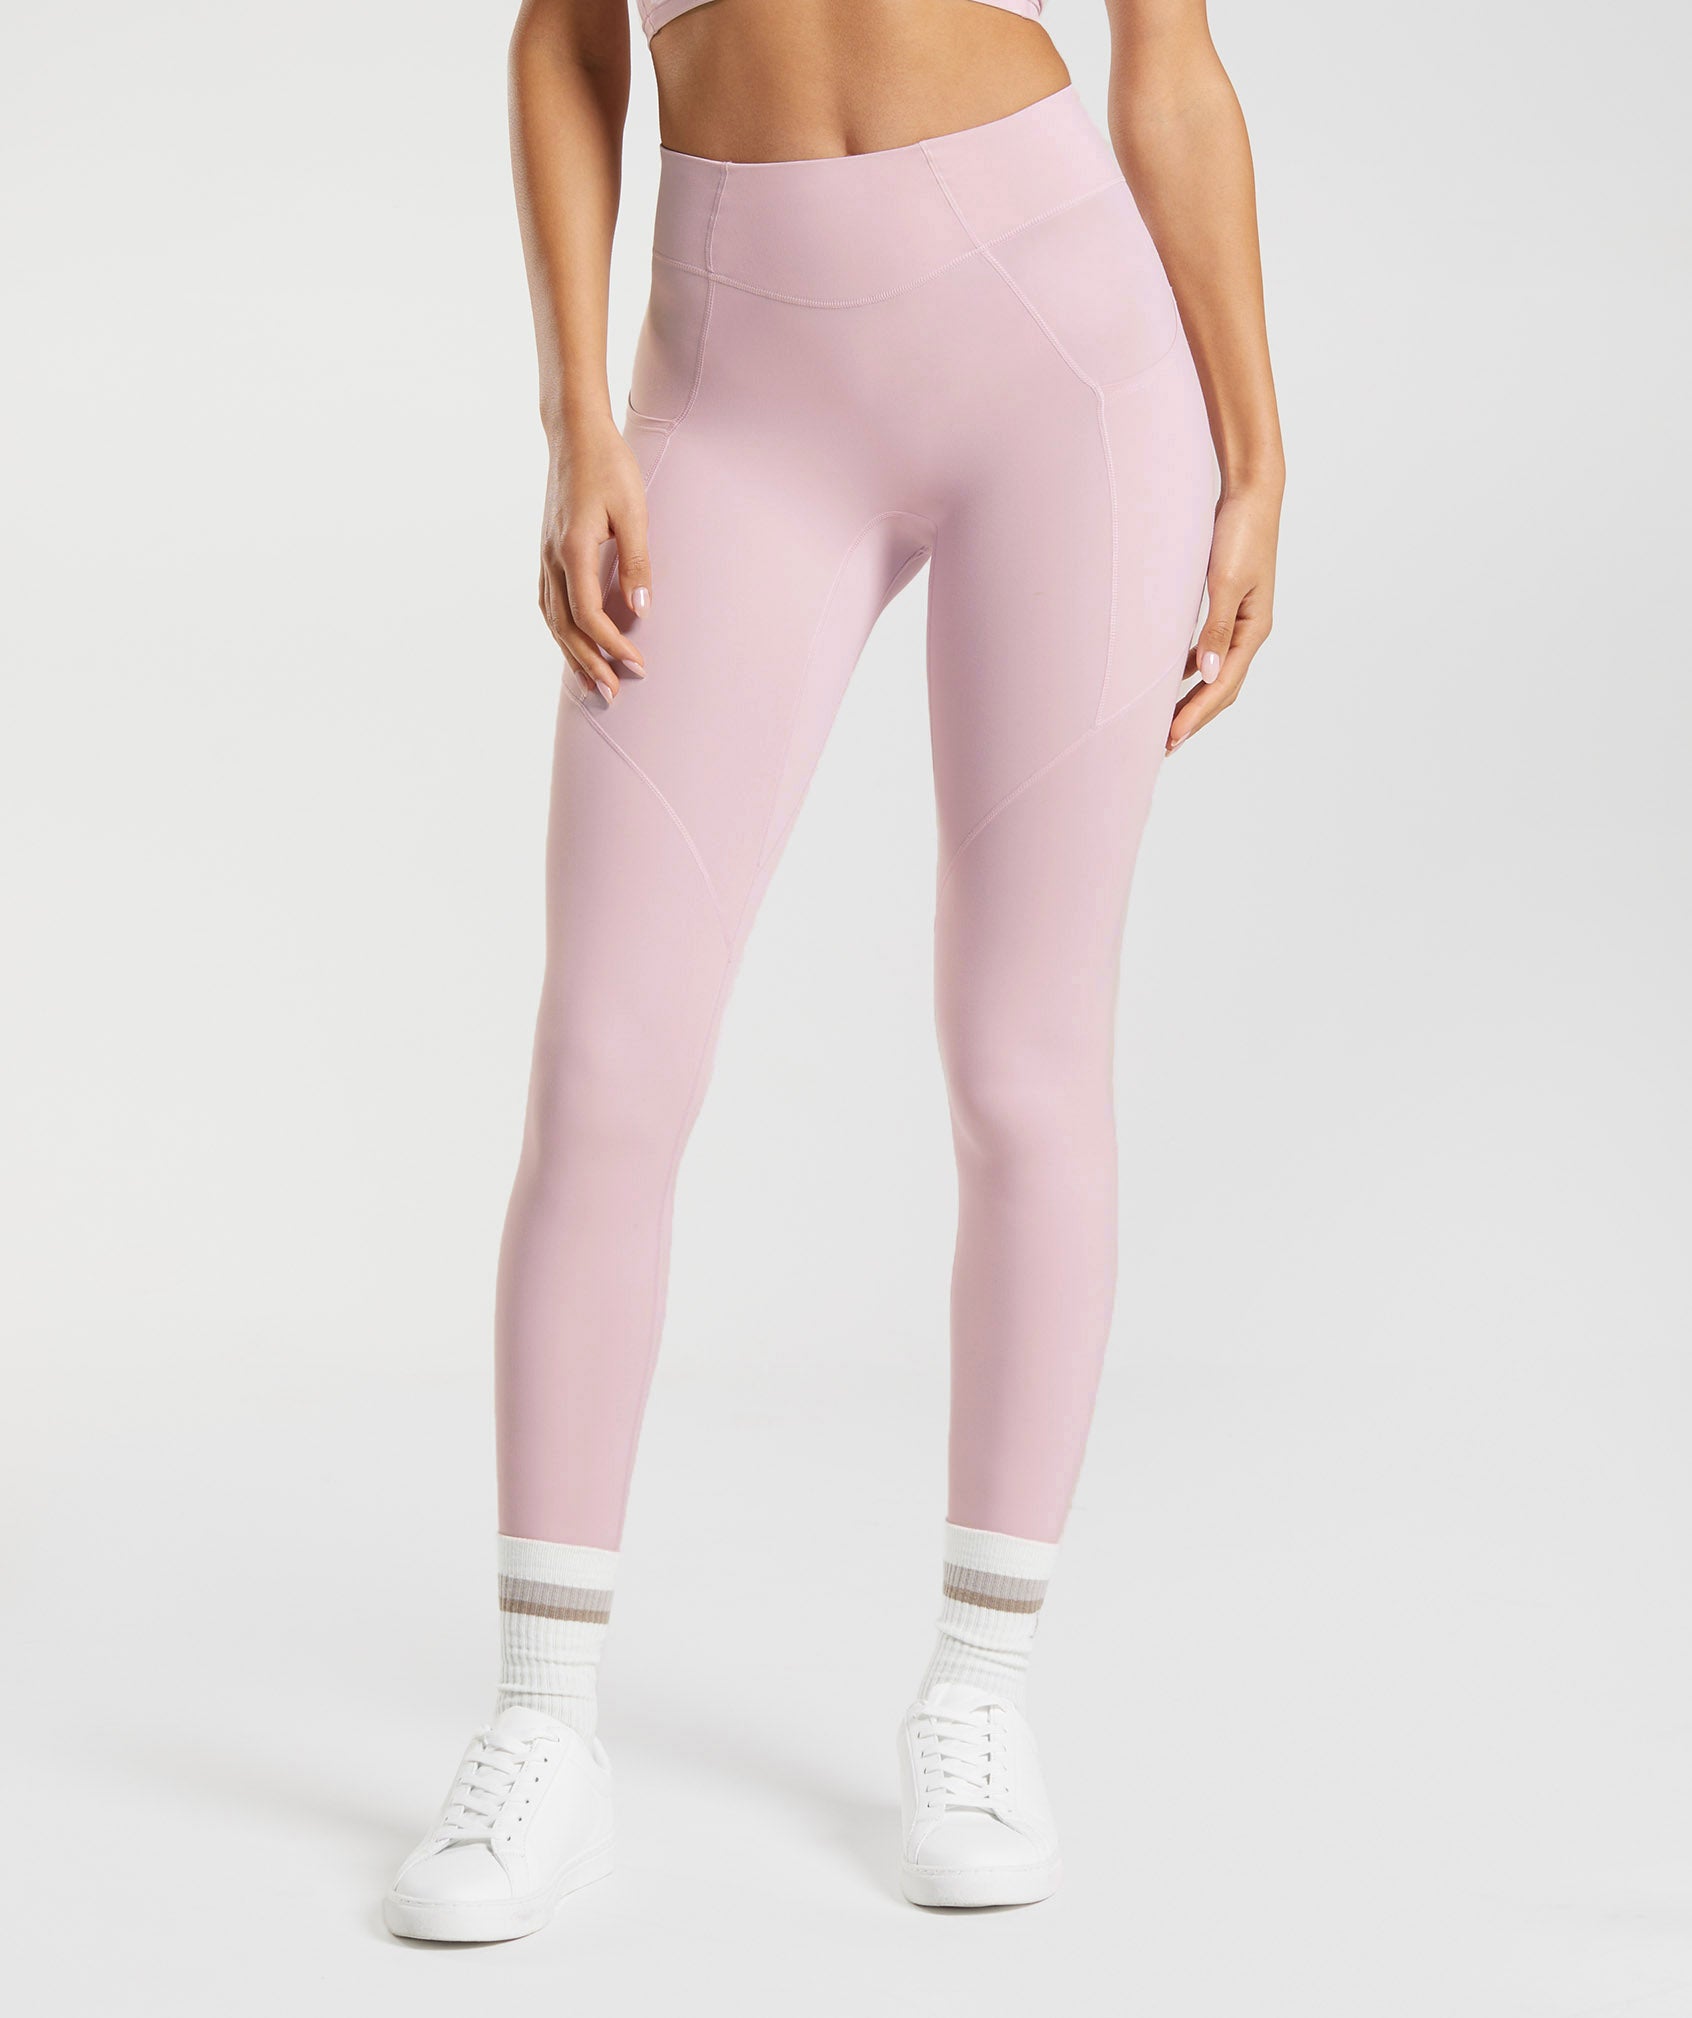 Gymshark SOLD OUT High Rise Baby Pink/ Chalk Pink Dreamy Athletic Leggings  Small